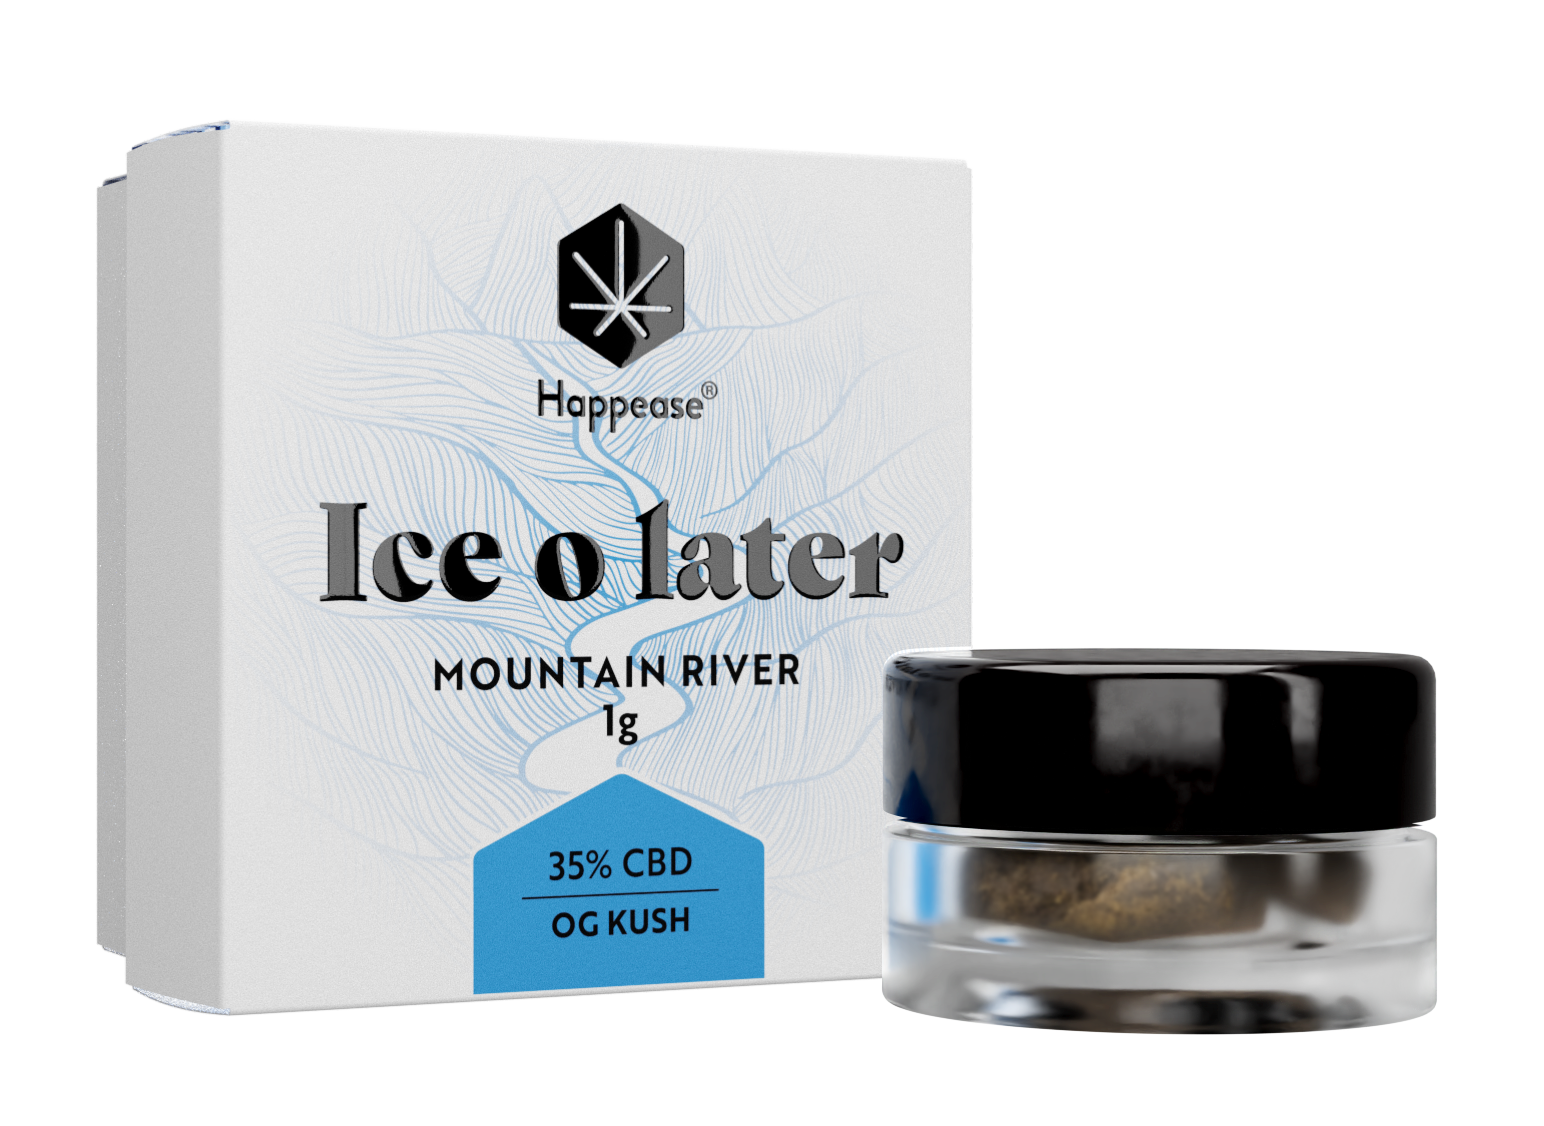 Ice o later Moutain River 35% CBD